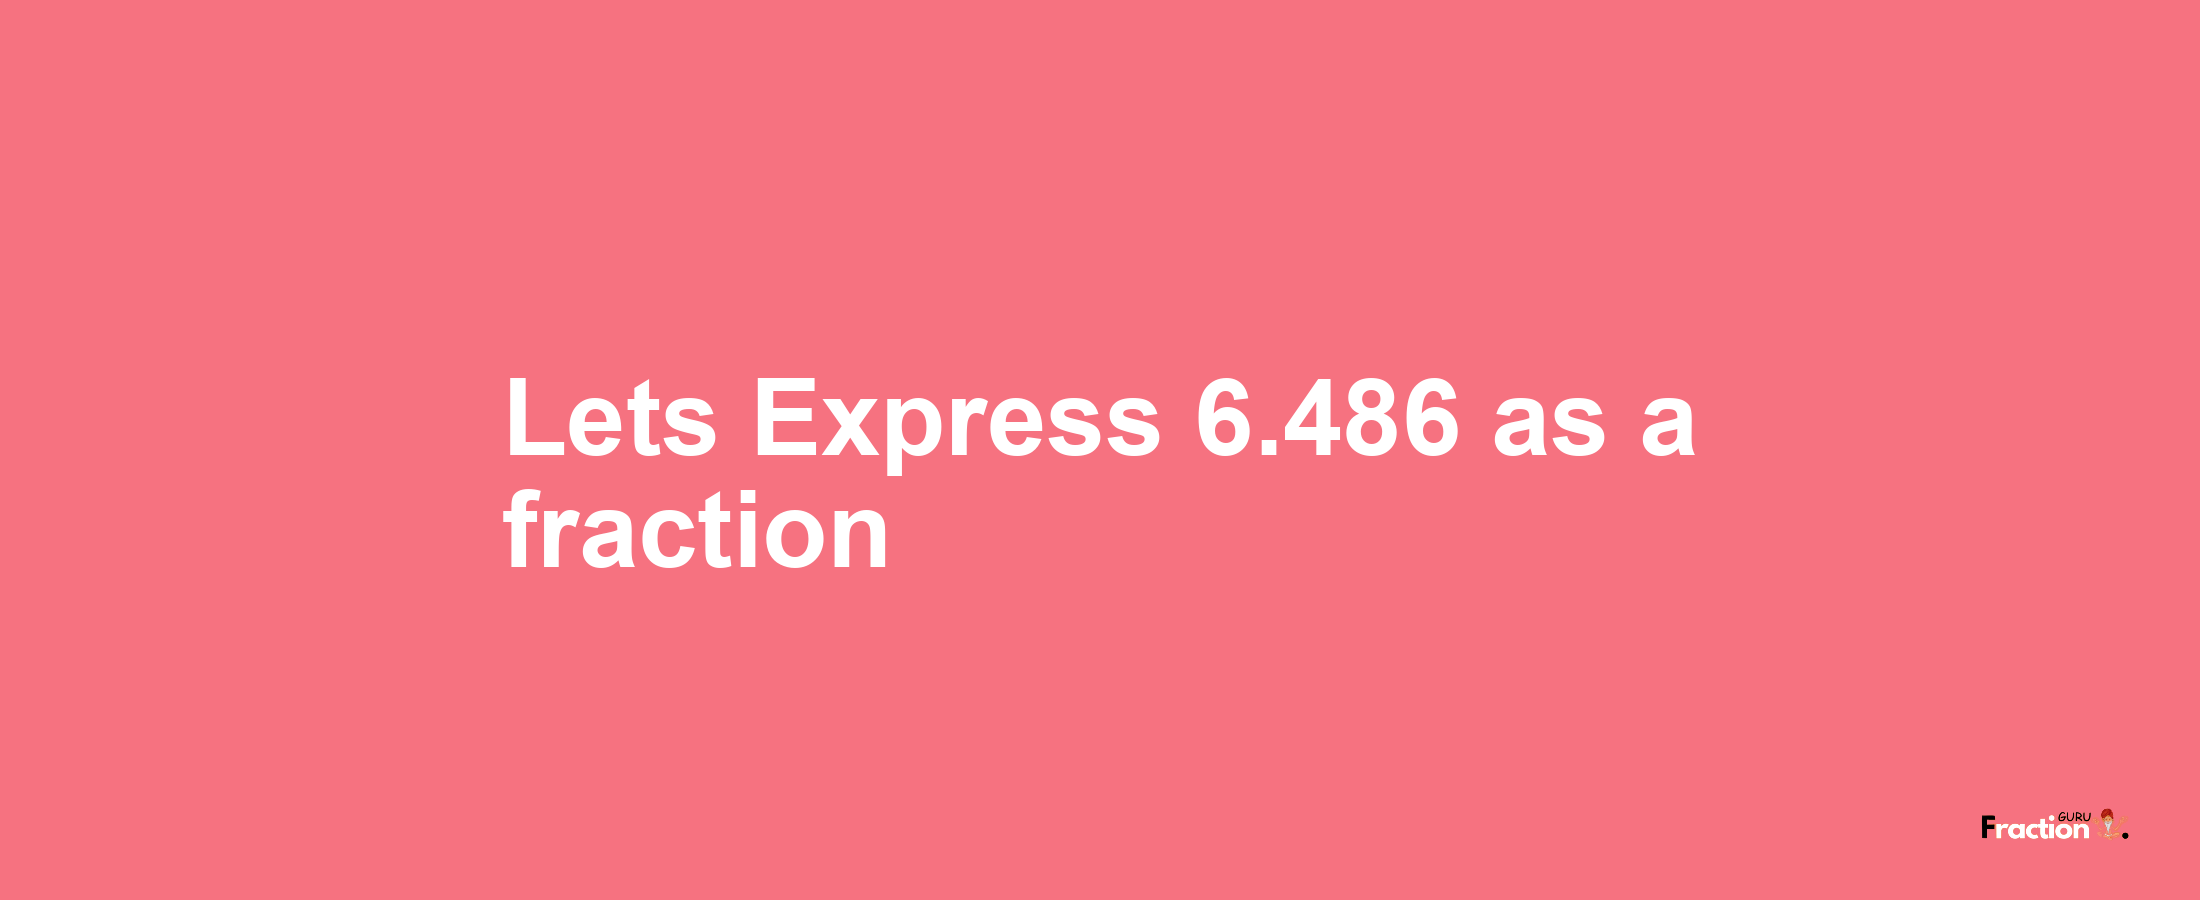 Lets Express 6.486 as afraction